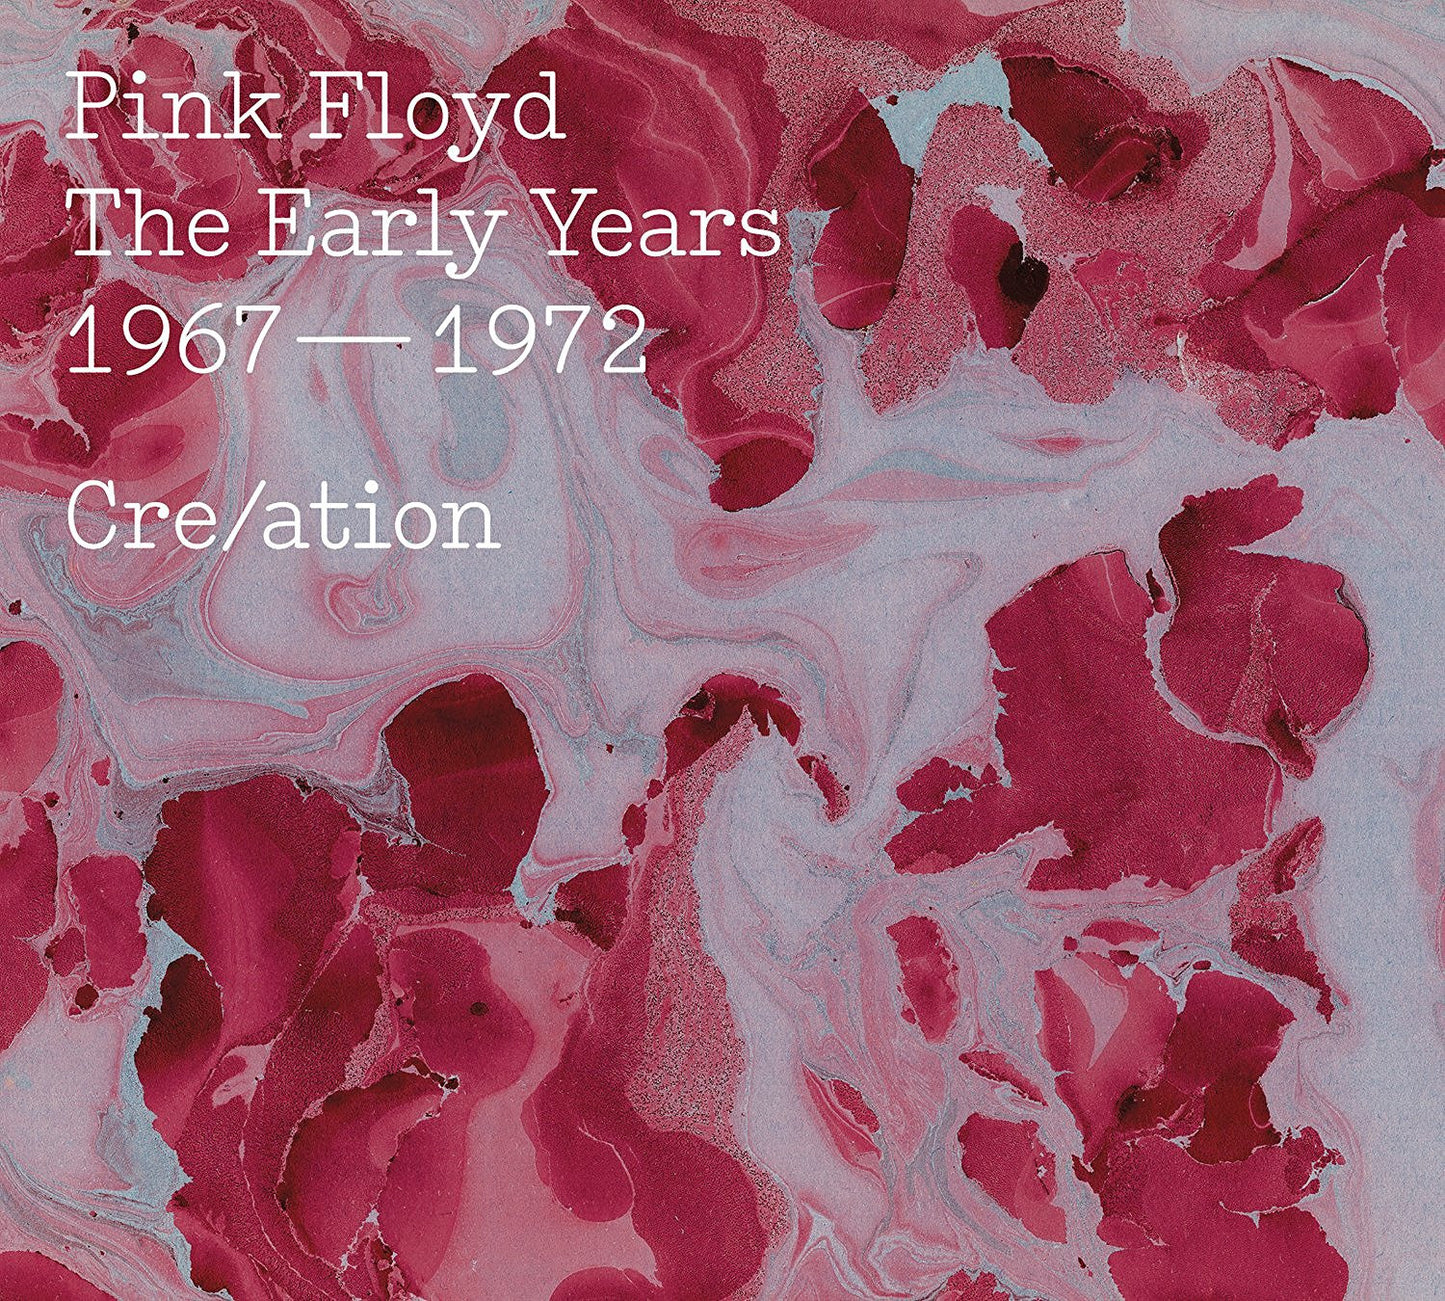 CD - Pink Floyd - Cre/Ation - The Early Years 1967-1972